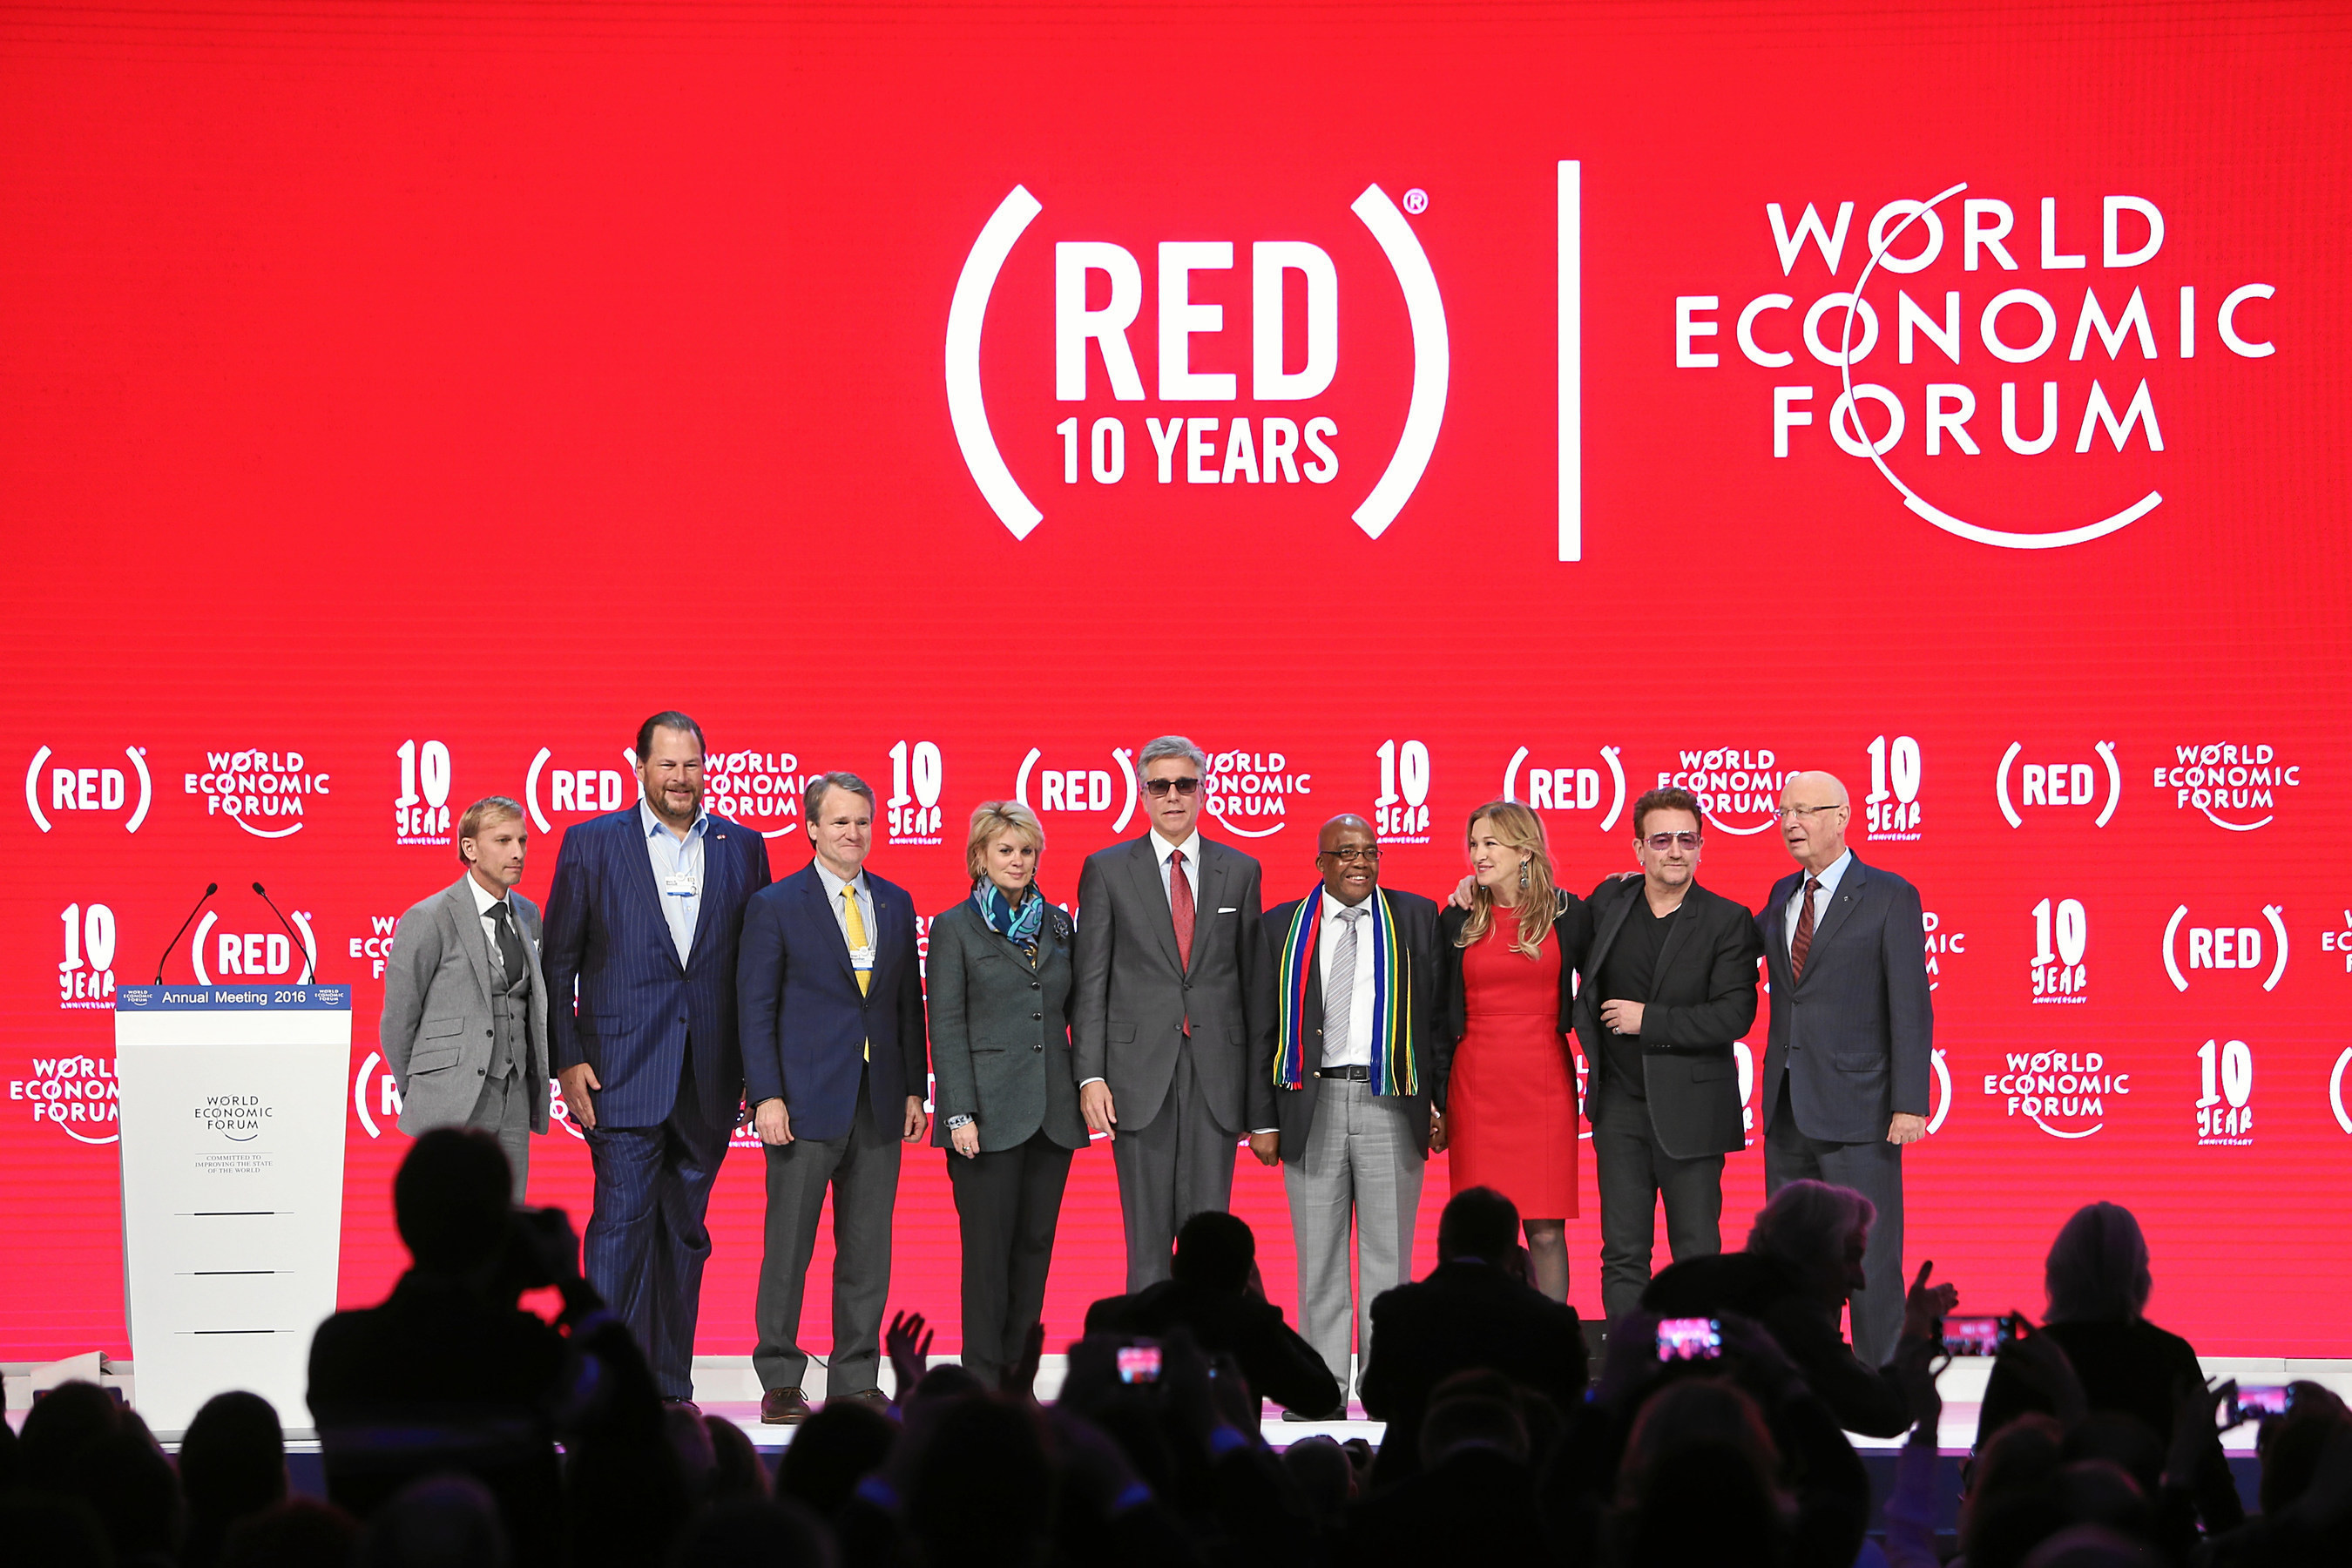 Marking 10 years of (RED) at the 2016 World Economic Forum: Mark Dybul, Executive Director, The Global Fund to Fight AIDS, Tuberculosis and Malaria, Marc Benioff, CEO, Salesforce, Brian Moynihan, Chairman and CEO, Bank of America, Anne Finucane, Vice Chair, Bank of America, Bill McDermott, CEO, SAP, Dr. Aaron Motsoaledi, Minister of Health, South Africa, Deborah Dugan, CEO, (RED), Bono, Klaus Schwab, Founder and Executive Chairman, World Economic Forum